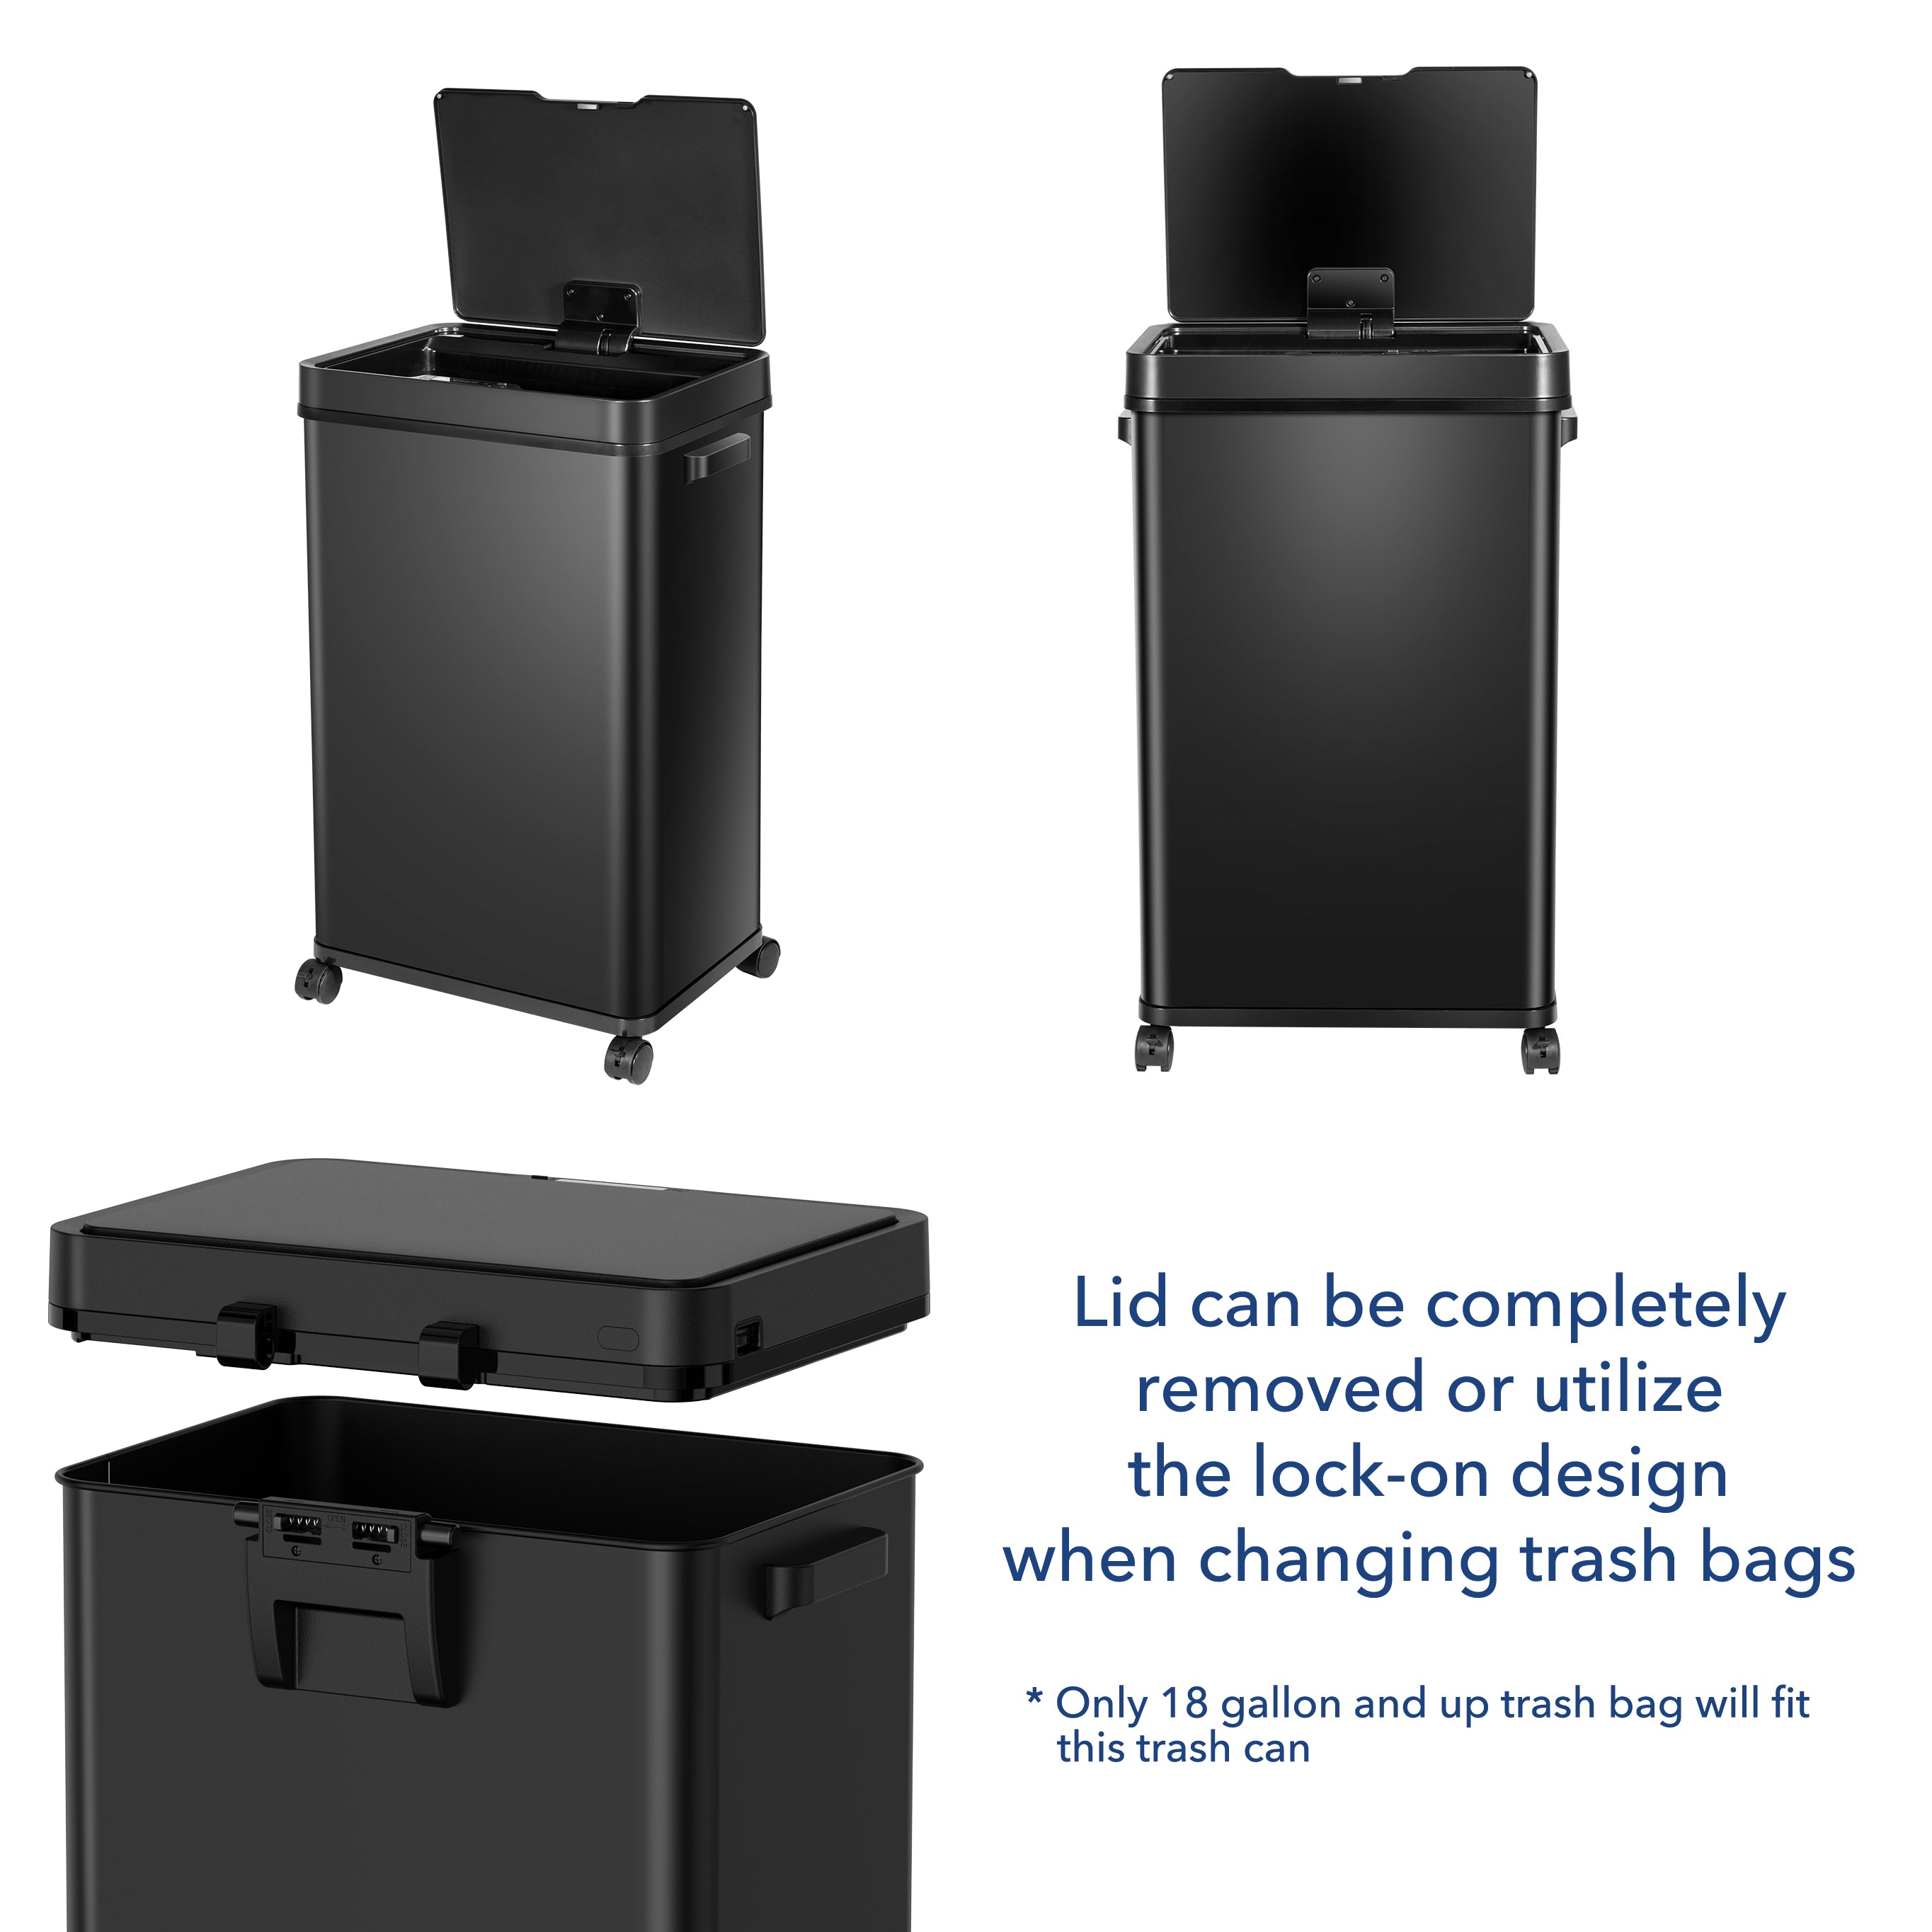 CozyBlock 18 Gallon Automatic Trash Can, Black Steel Touchless Motion Sensor Bin, Wide Opening Soft Close Lid, 68L, Large Capacity Slim Design